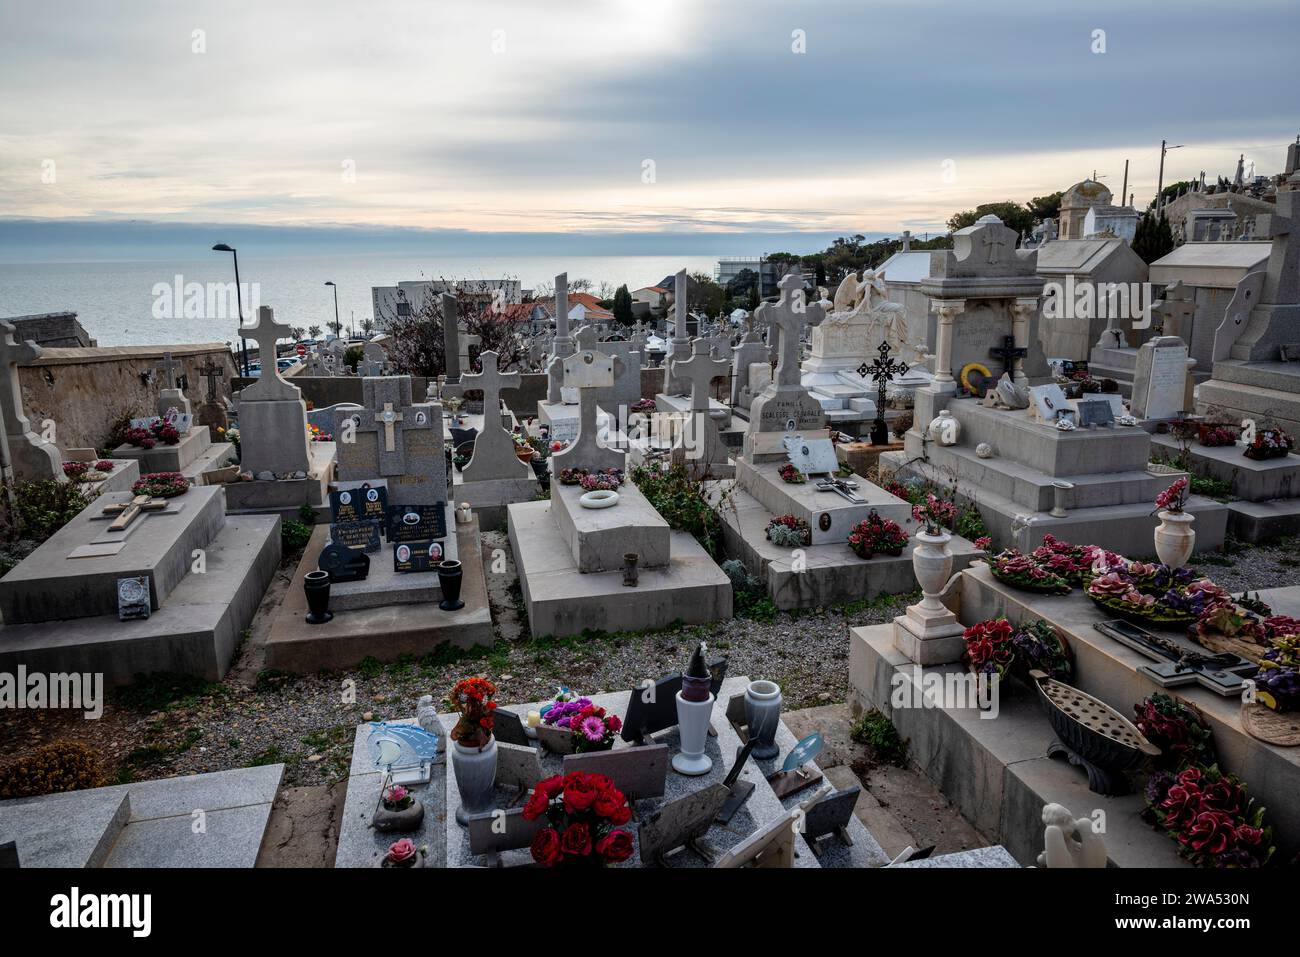 Cimetière Marin or The sea cemetery in Sète, a major port city in the southeast French region of Occitanie, France Stock Photo